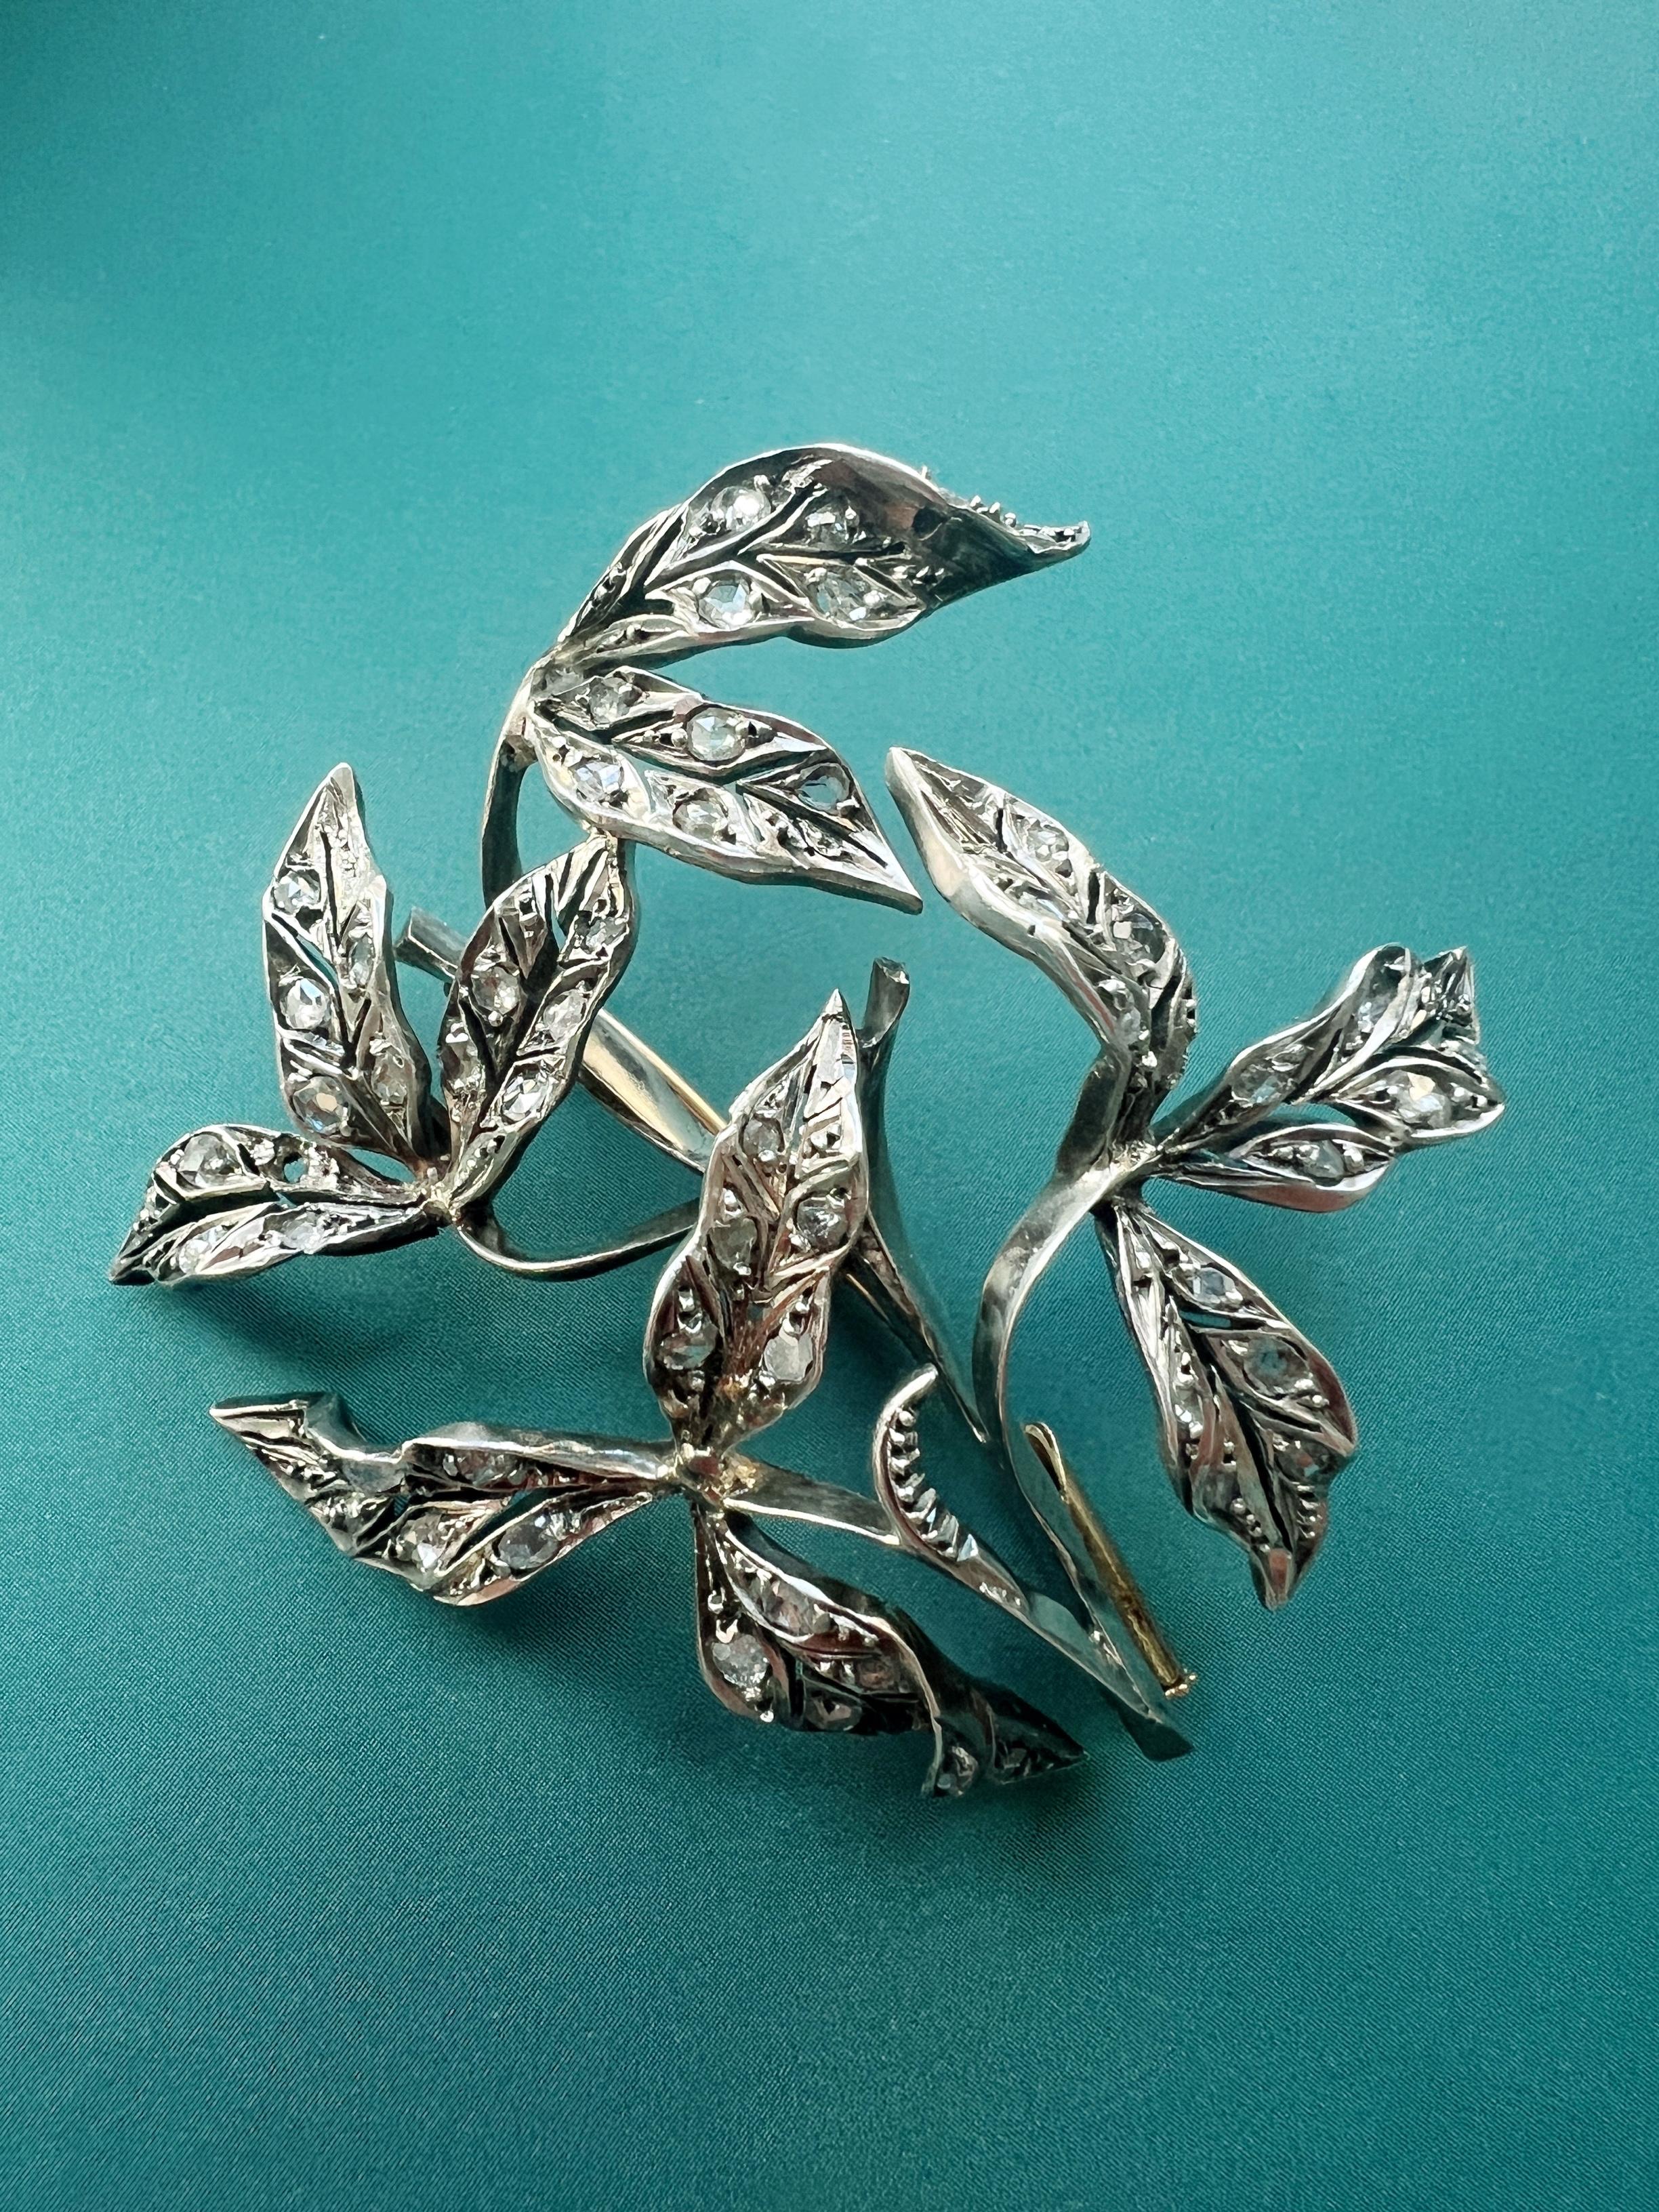 This magnificent Art Nouveau era brooch captures perfectly the quite power of the leaves and the tension of their short life. We love how each of the leaves is individually “sculptured” with its own characteristics, bringing extraordinary vitality